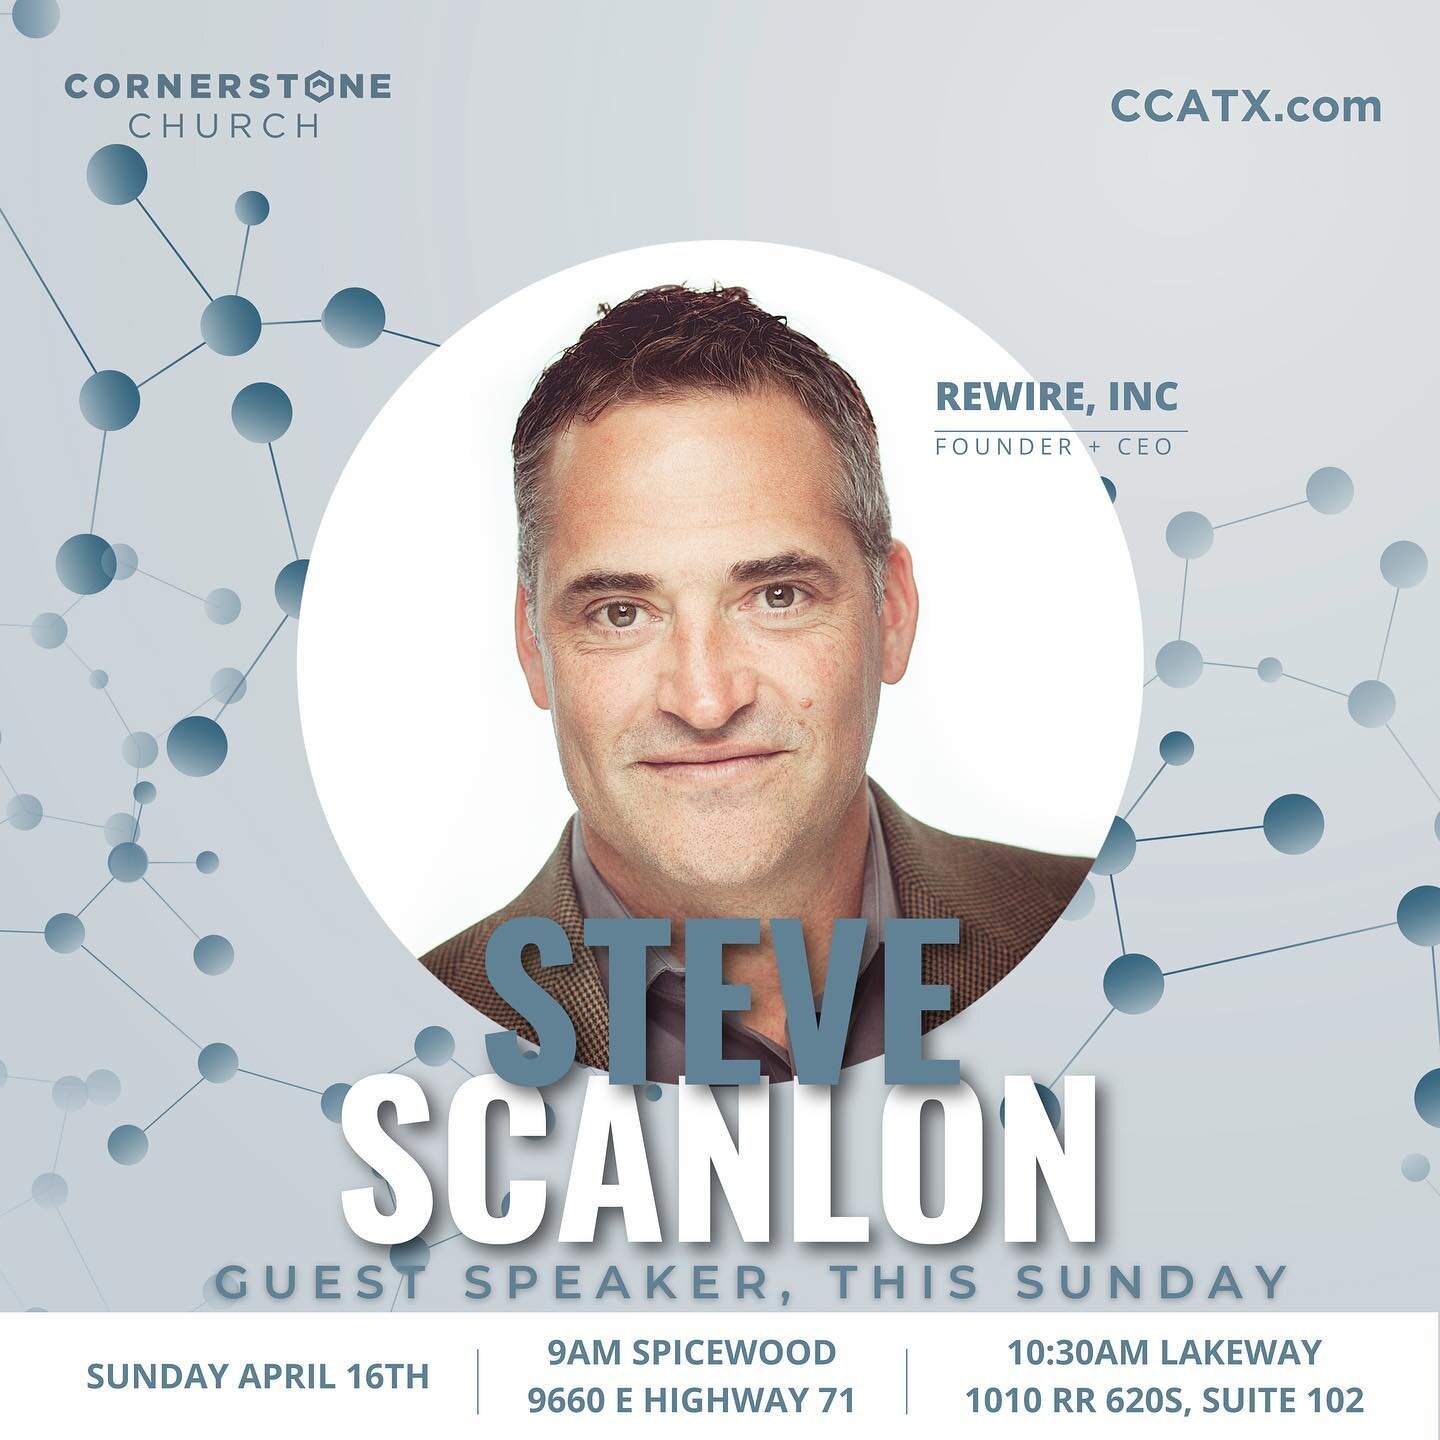 Do you want to know THE TRUTH about worry, fear and anxiety? 

What does it mean to productively manage stress in this crazy world of ours? IS there a way to productively manage it, or are we just stuck with it? 

Speaker Steve Scanlon has some ideas